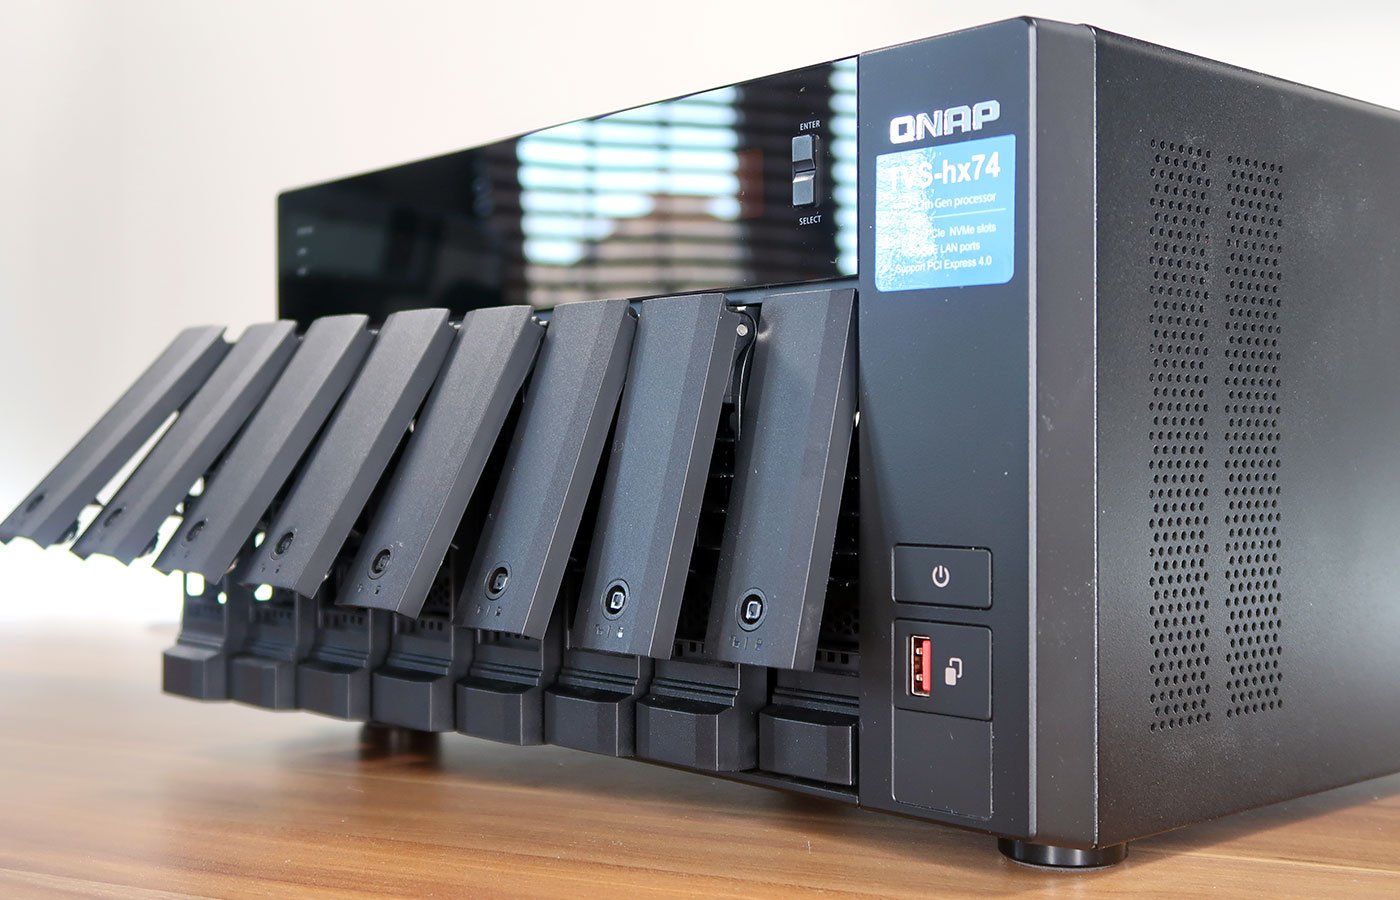 QNAP at CES: A M.2 SSD NAS, Dual-Xeon ZFS NAS and More